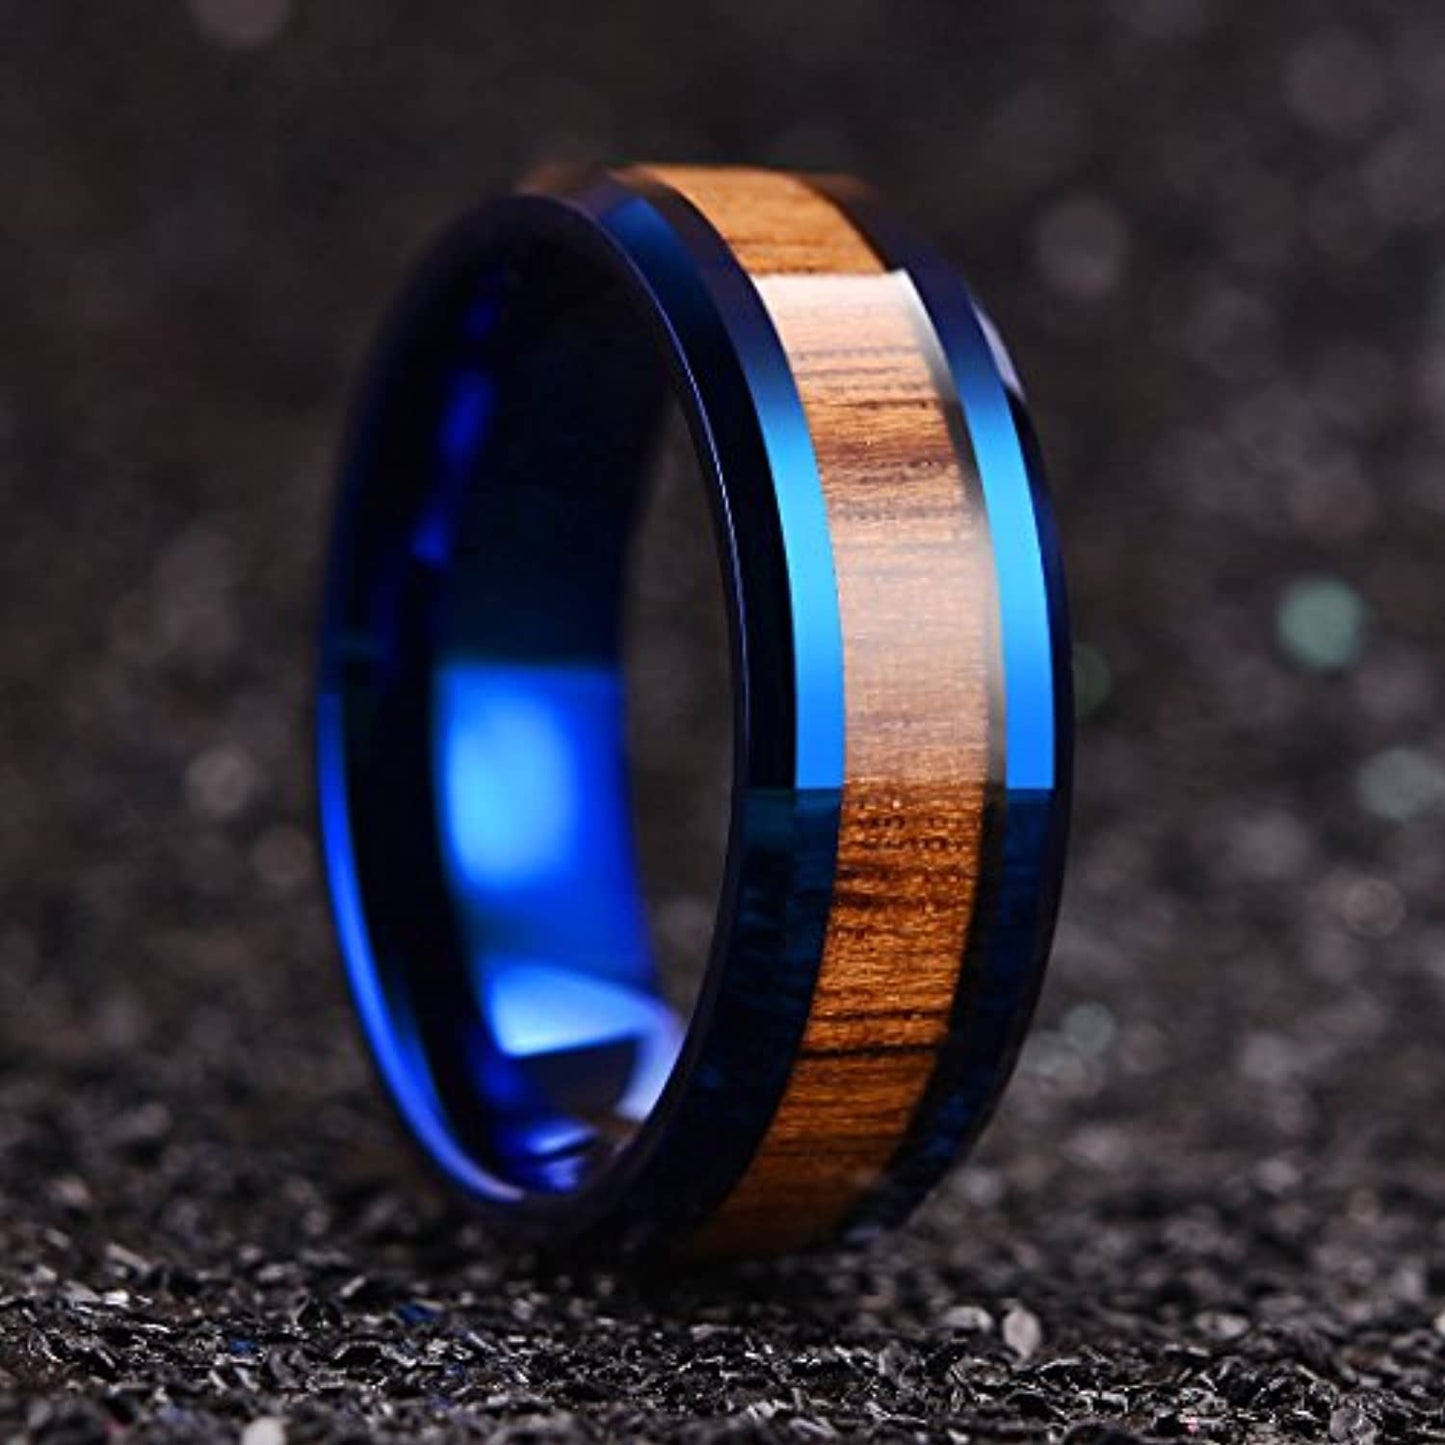 Blue Polished Beveled Tungsten Carbide Ring with Koa Wood Inlay | 8mm